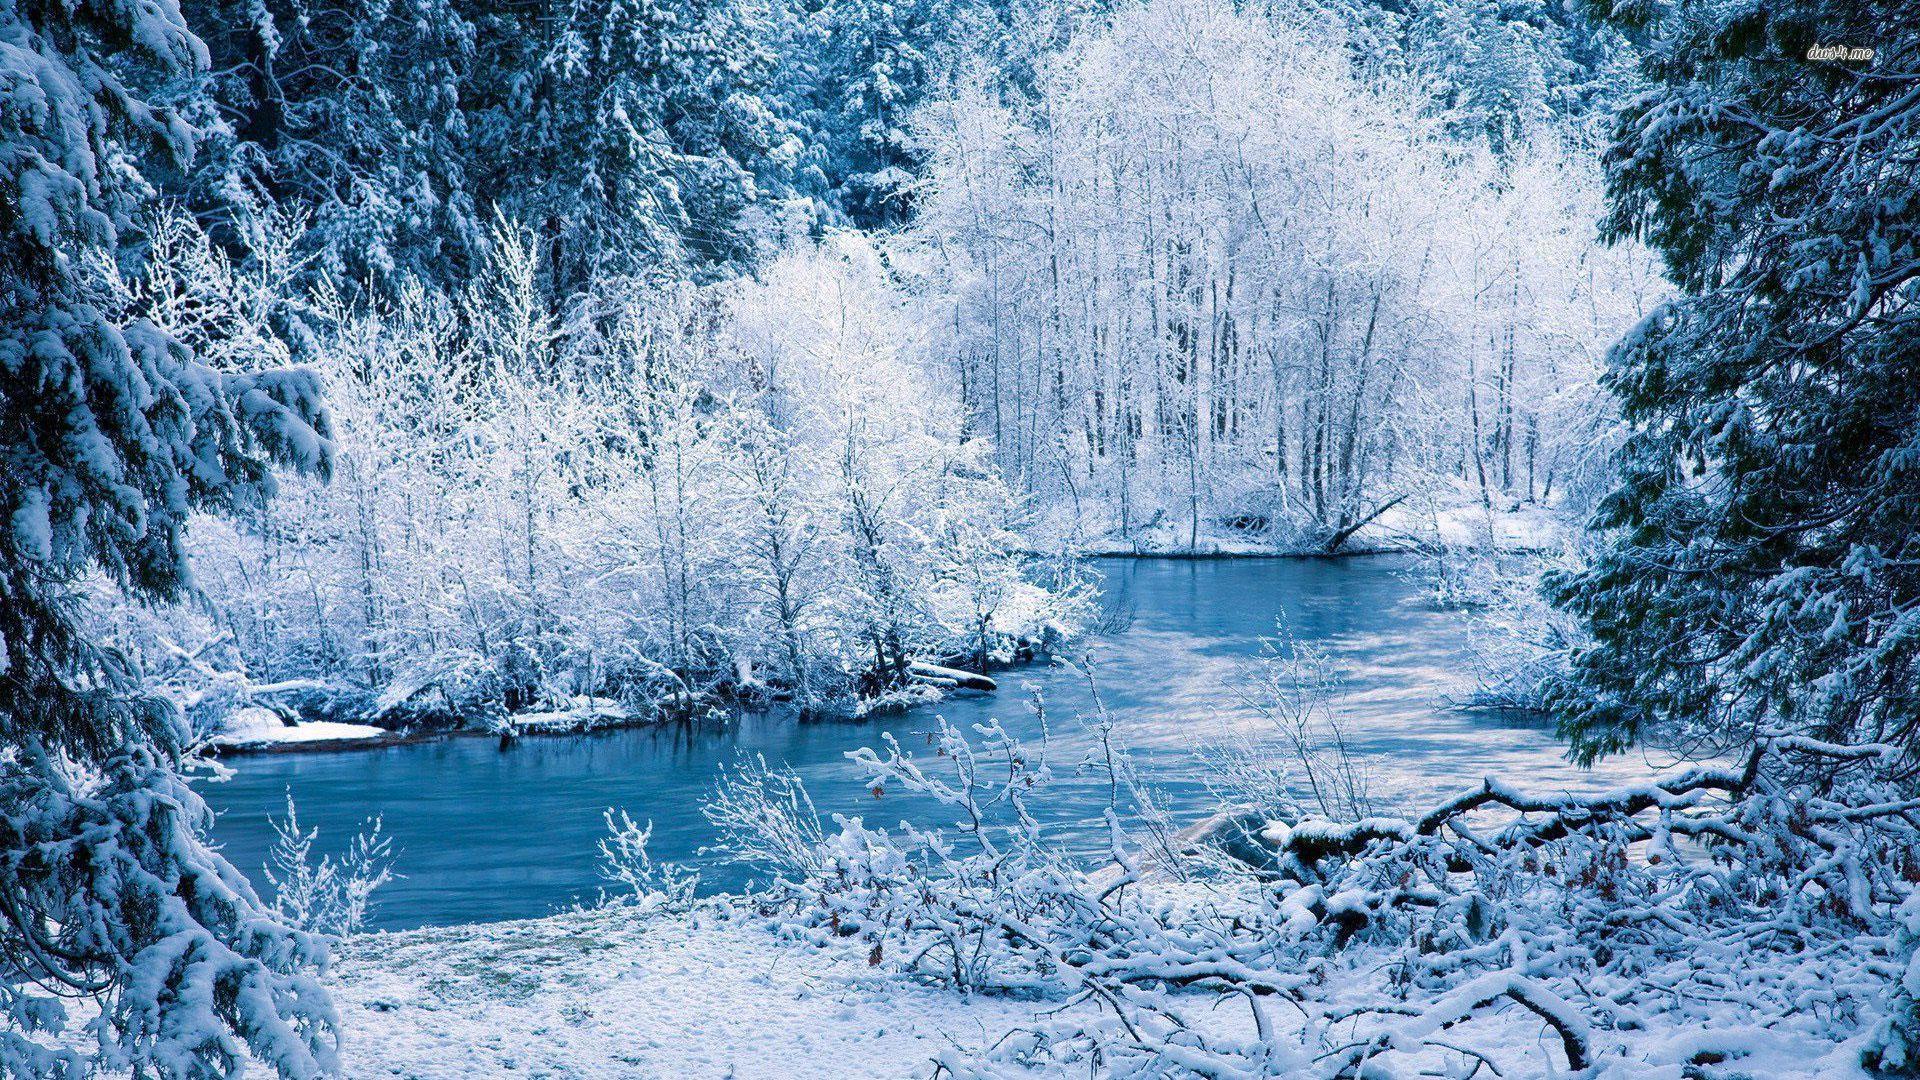 River in the winter forest wallpaper wallpaper